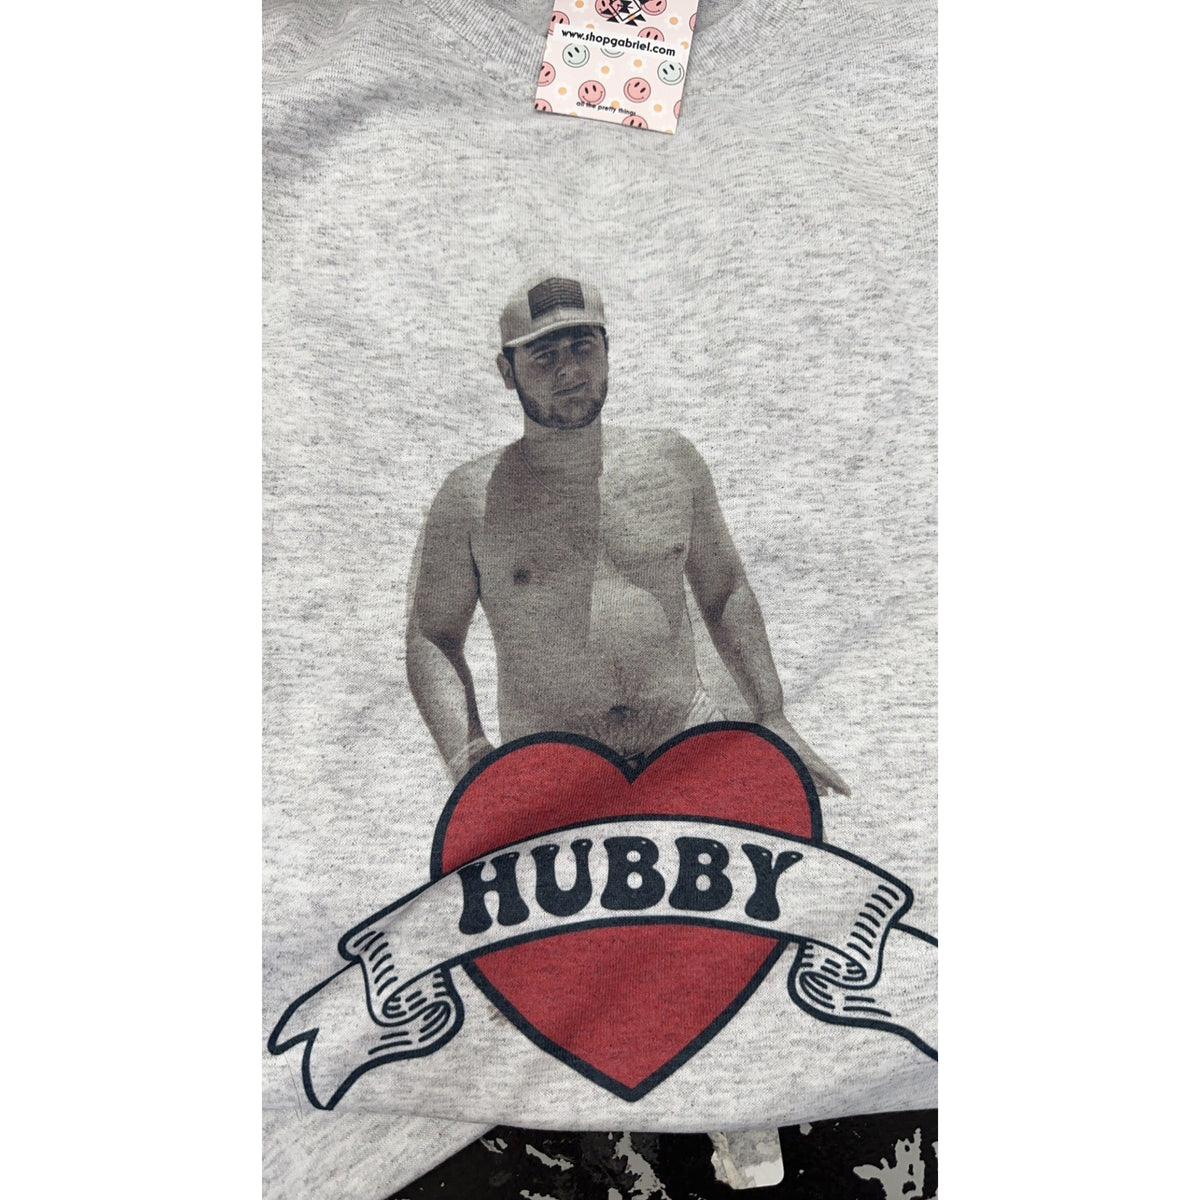 Hubby/Daddy Personalized T-shirt or Sweatshirt